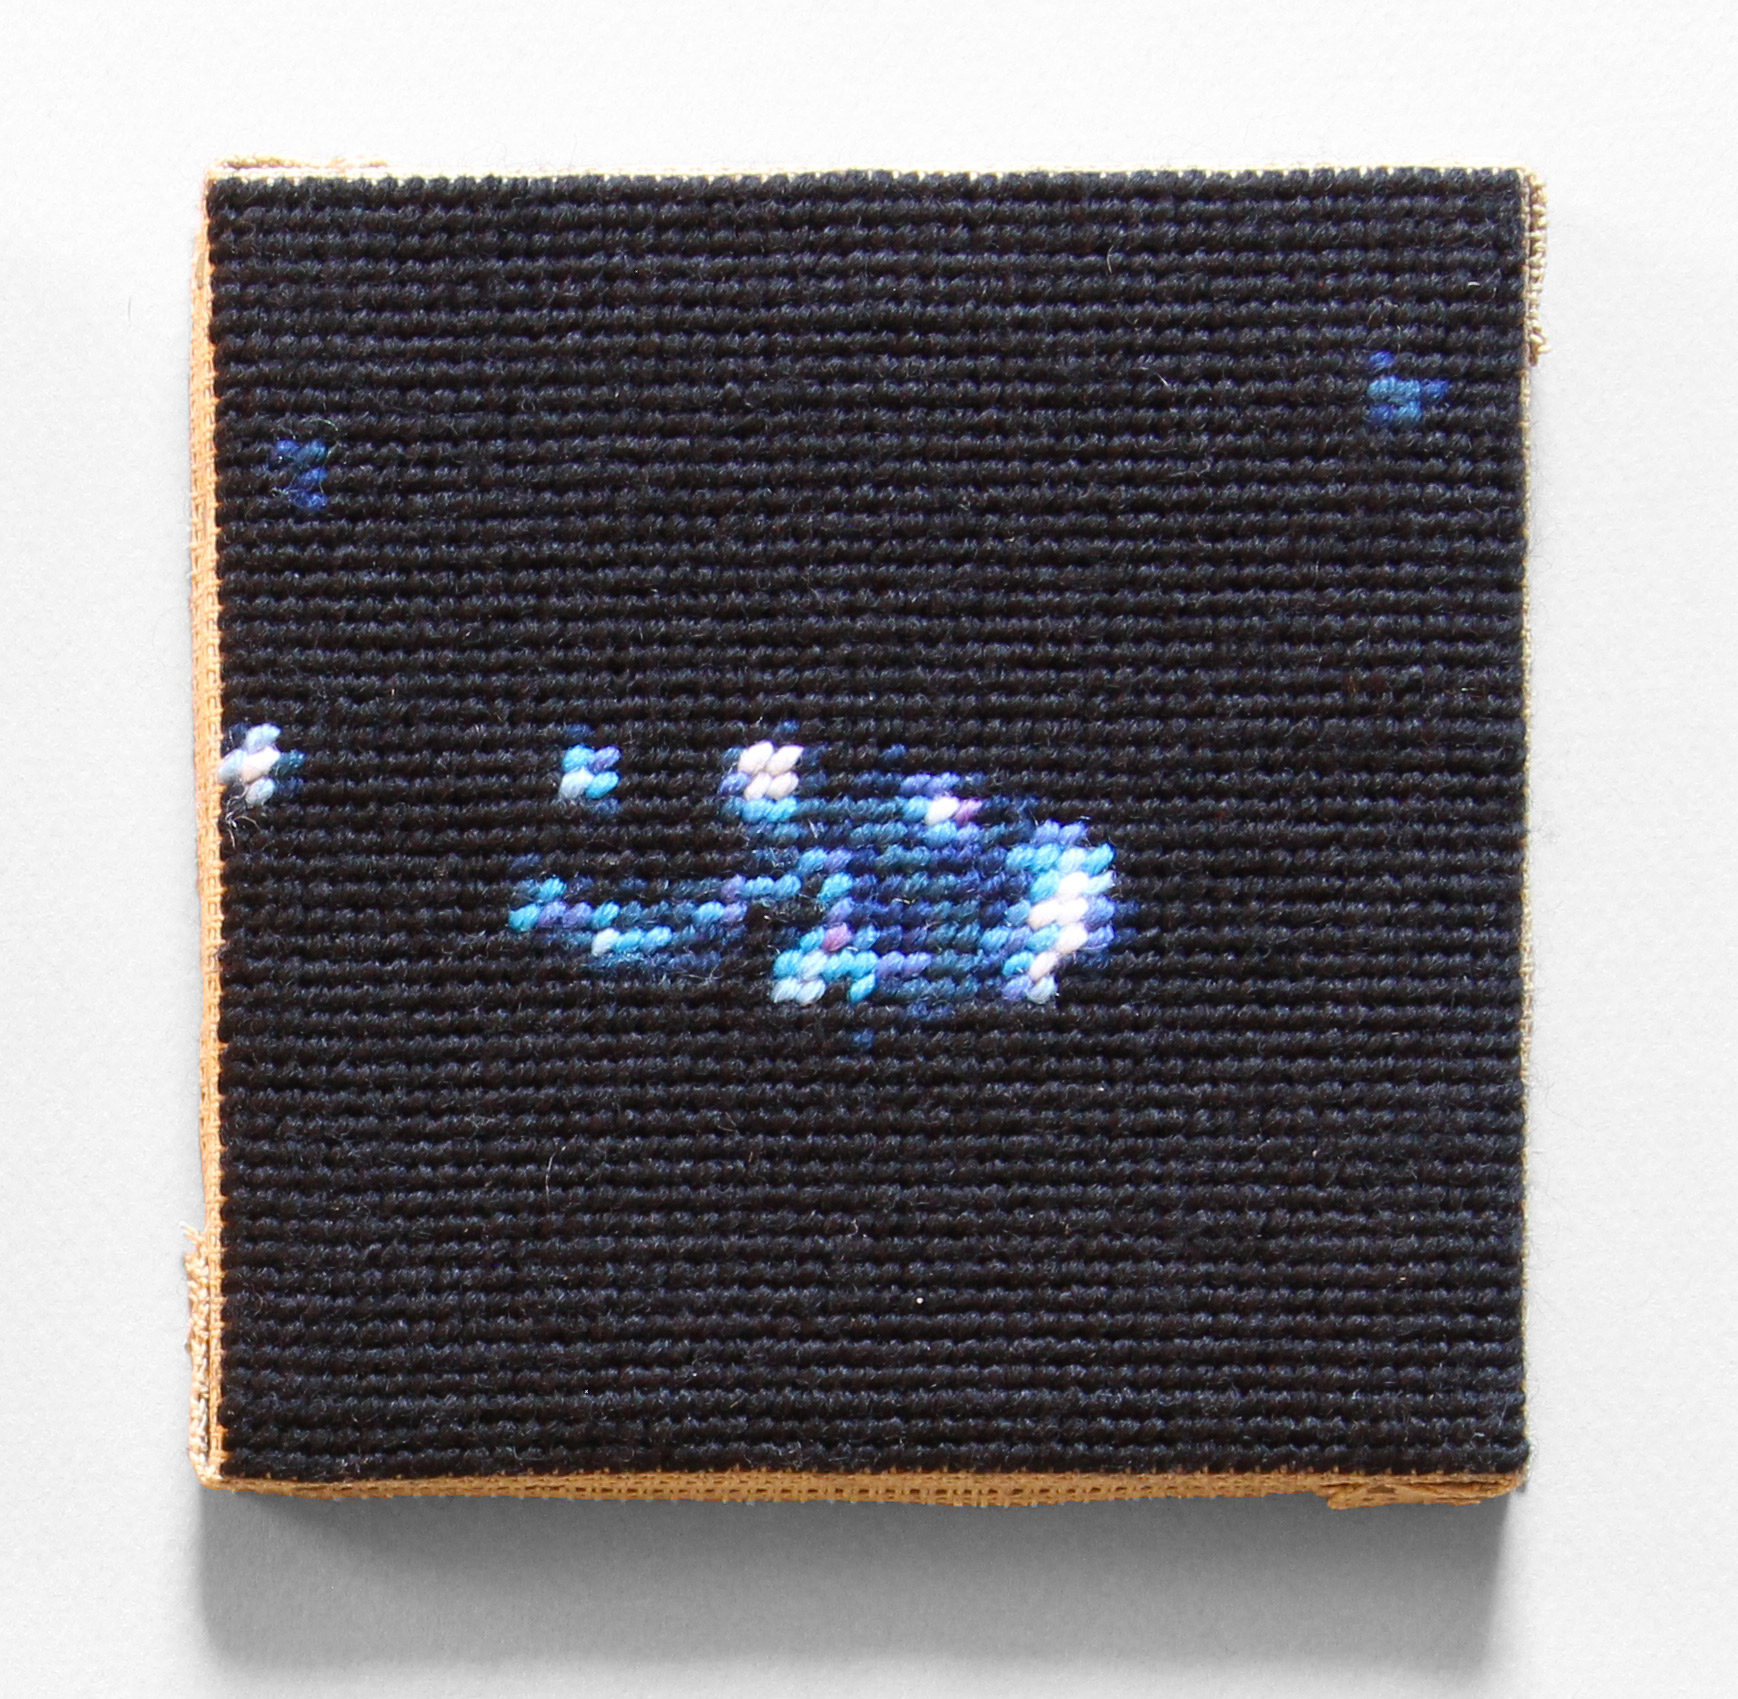  / Needlepoint of a galaxy located in the *Hubble Deep Field*. Art by artist Marine Beaufils.